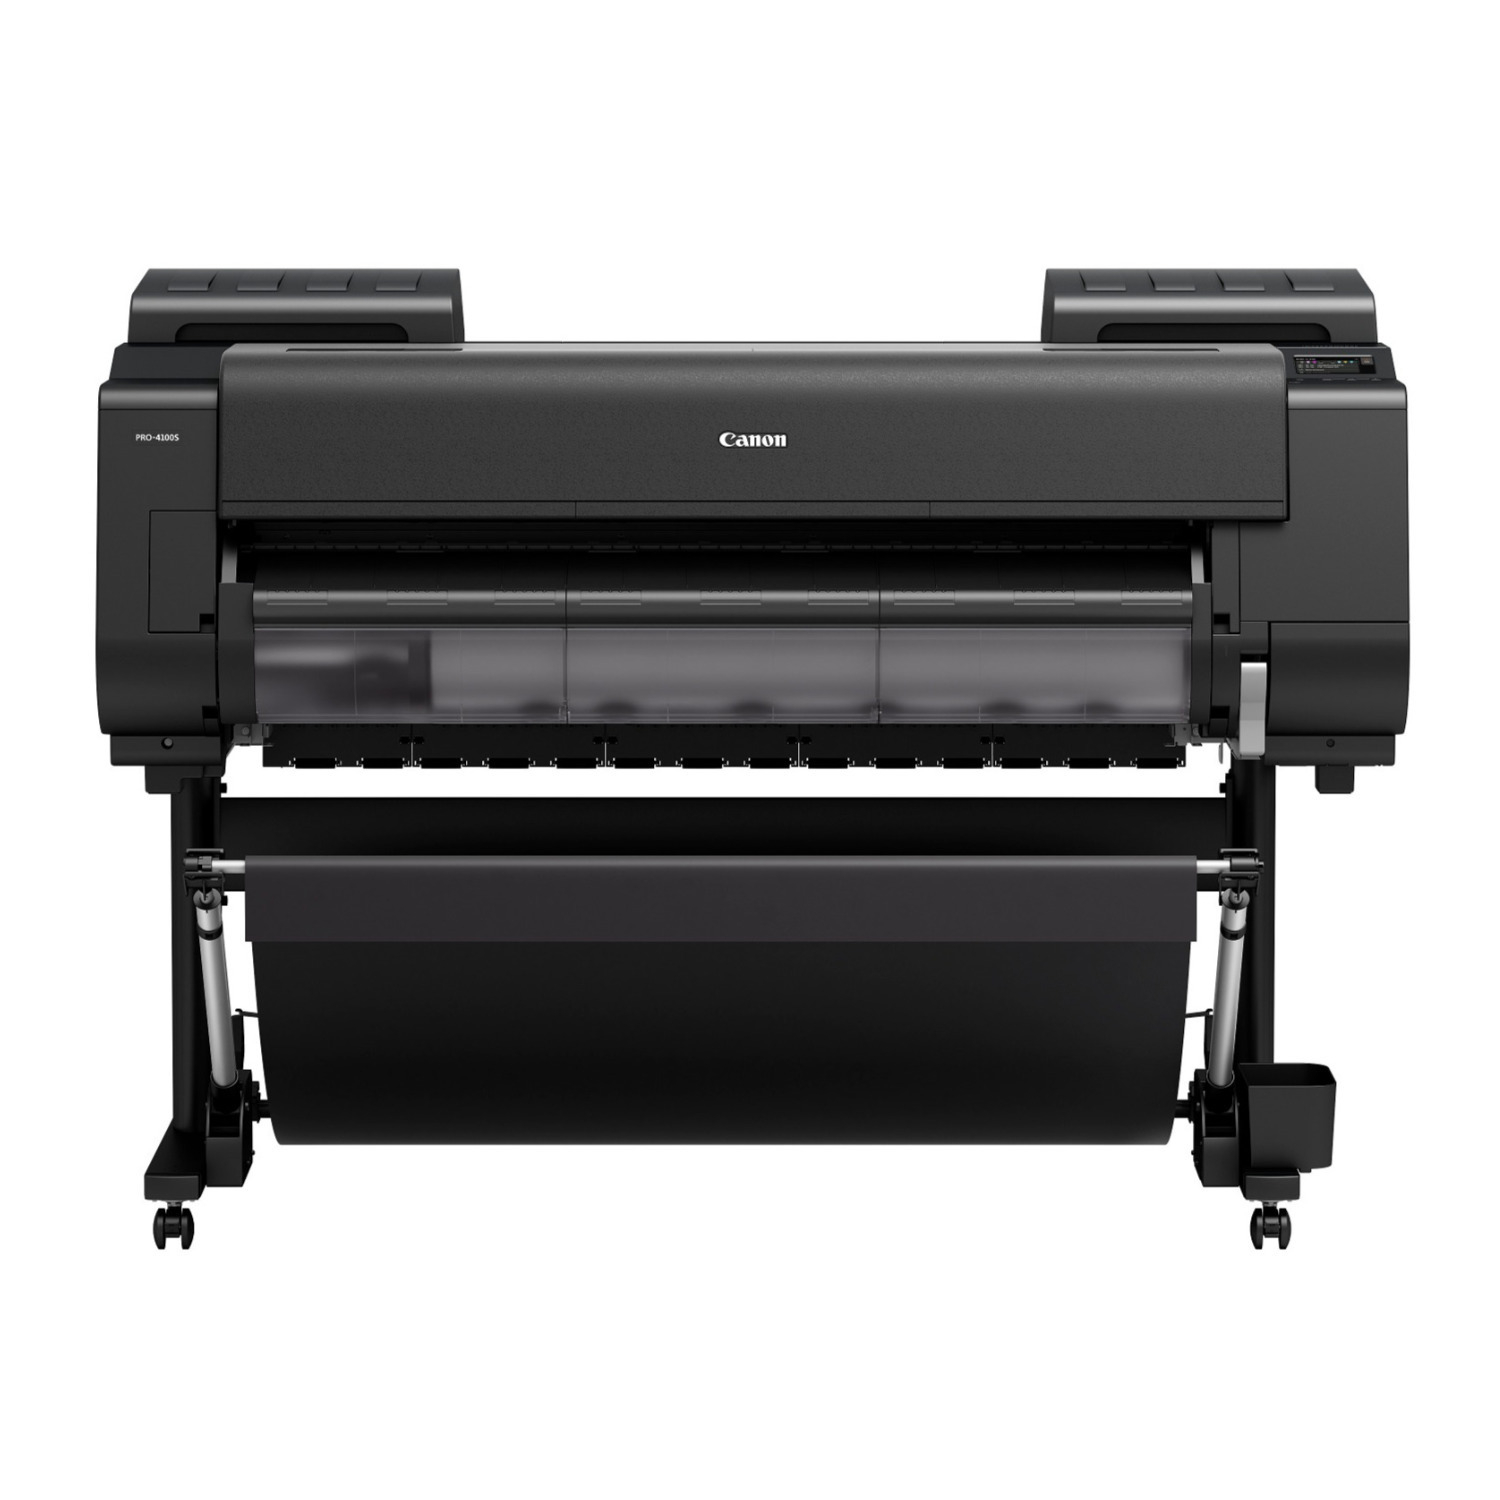 Canon imagePROGRAF Pro-4100S Large Format Production Printer in Black -  3873C002